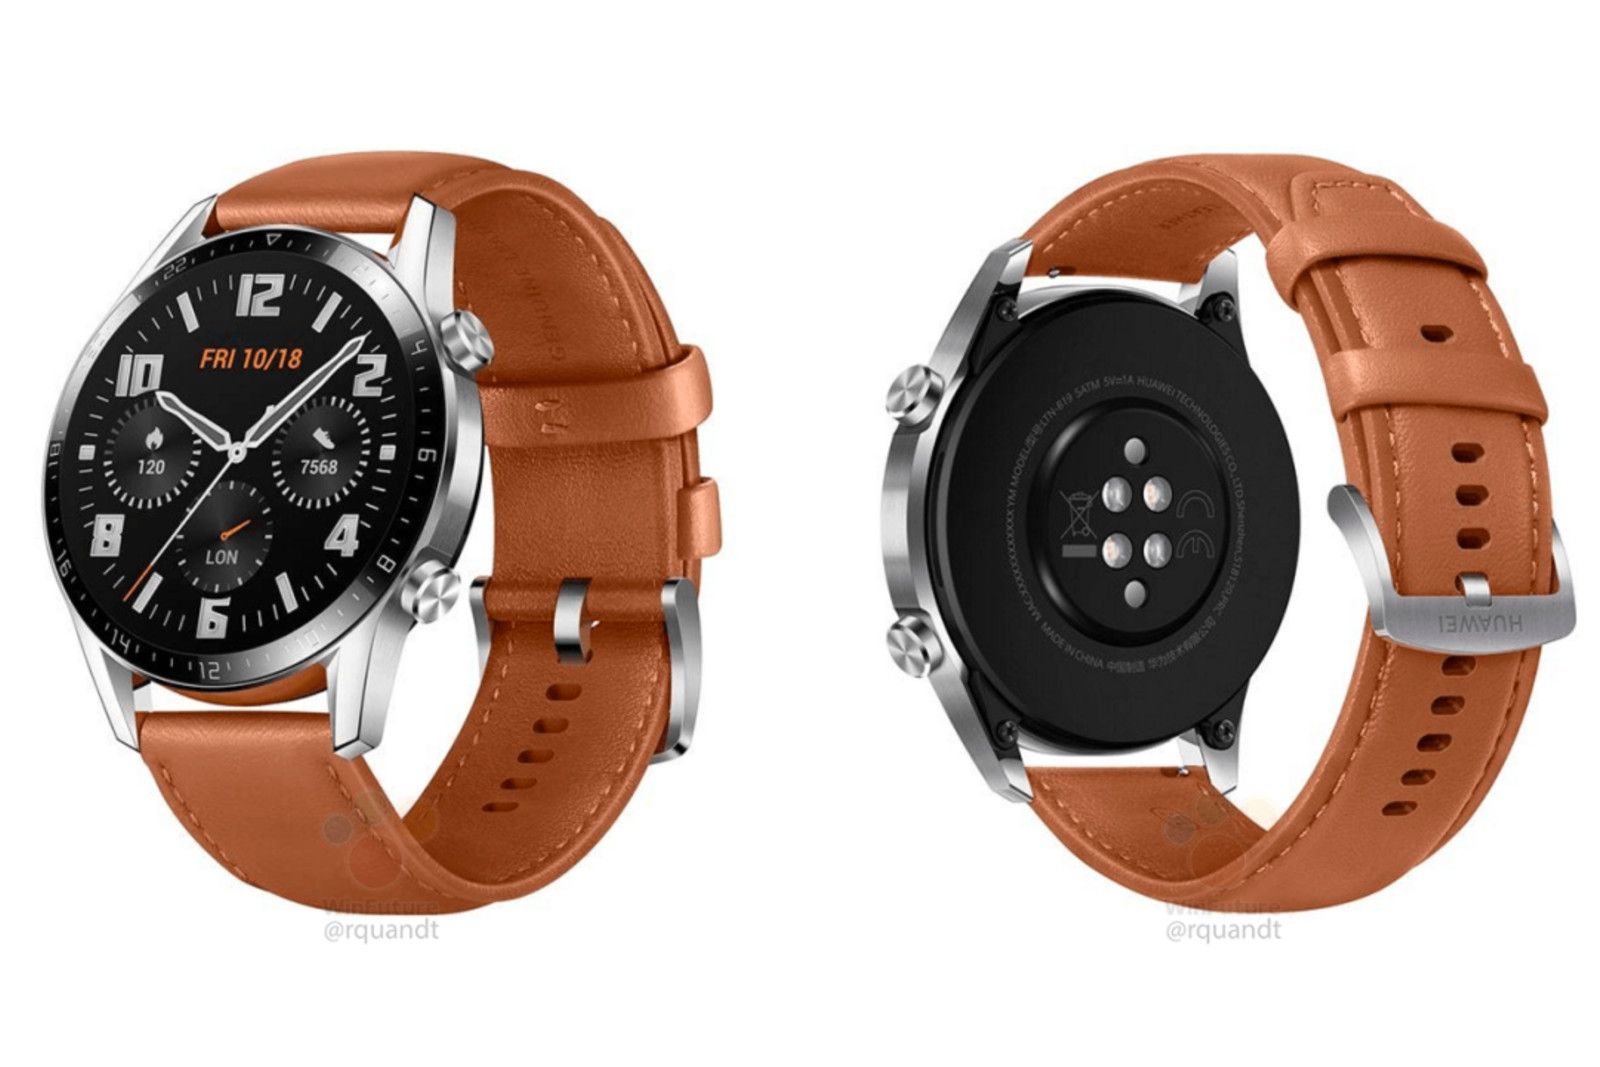 Huawei Watch Gt 2 Coming Soon With Bigger Battery Mic And Speaker image 3